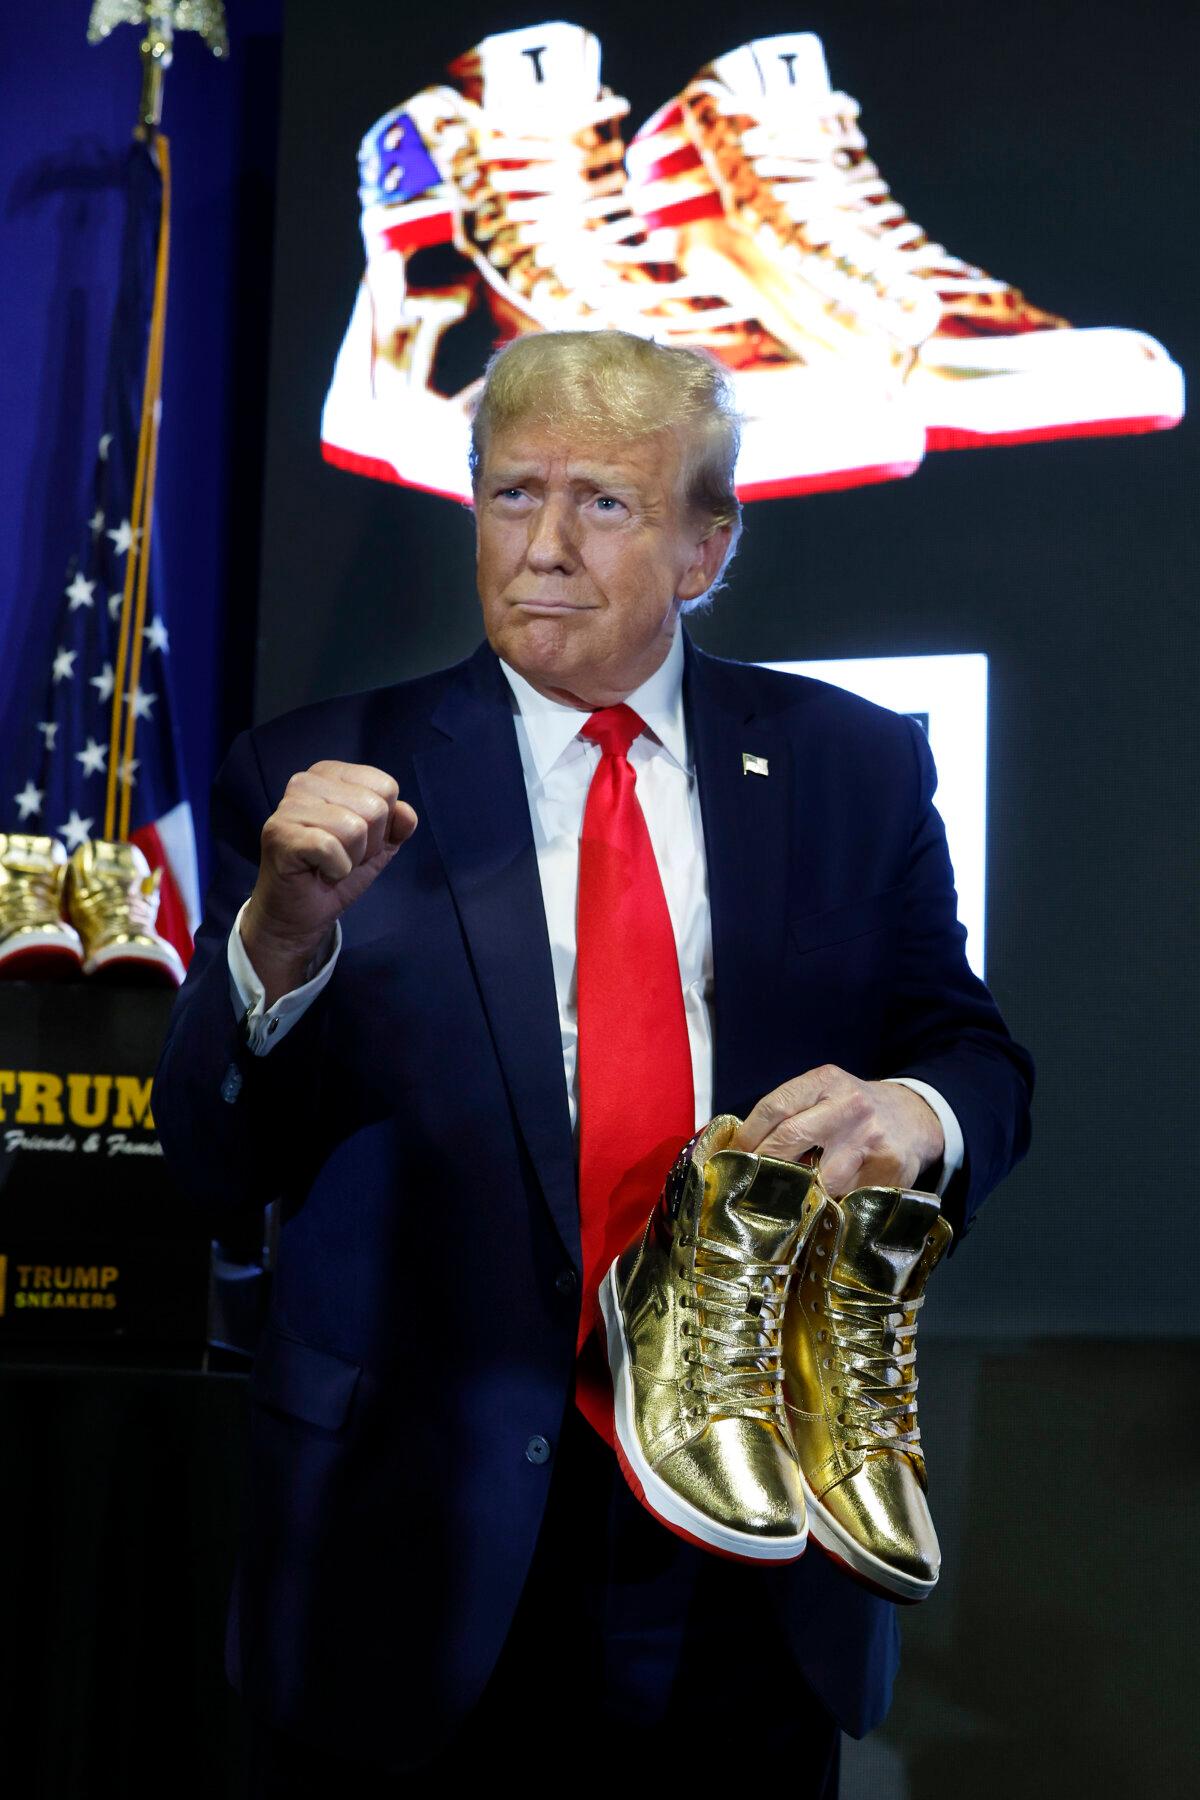 Republican presidential candidate and former President Donald Trump holds a pair of his new line of signature shoes after taking the stage at Sneaker Con at the Philadelphia Convention Center in Philadelphia on Feb. 17, 2024. (Chip Somodevilla/Getty Images)